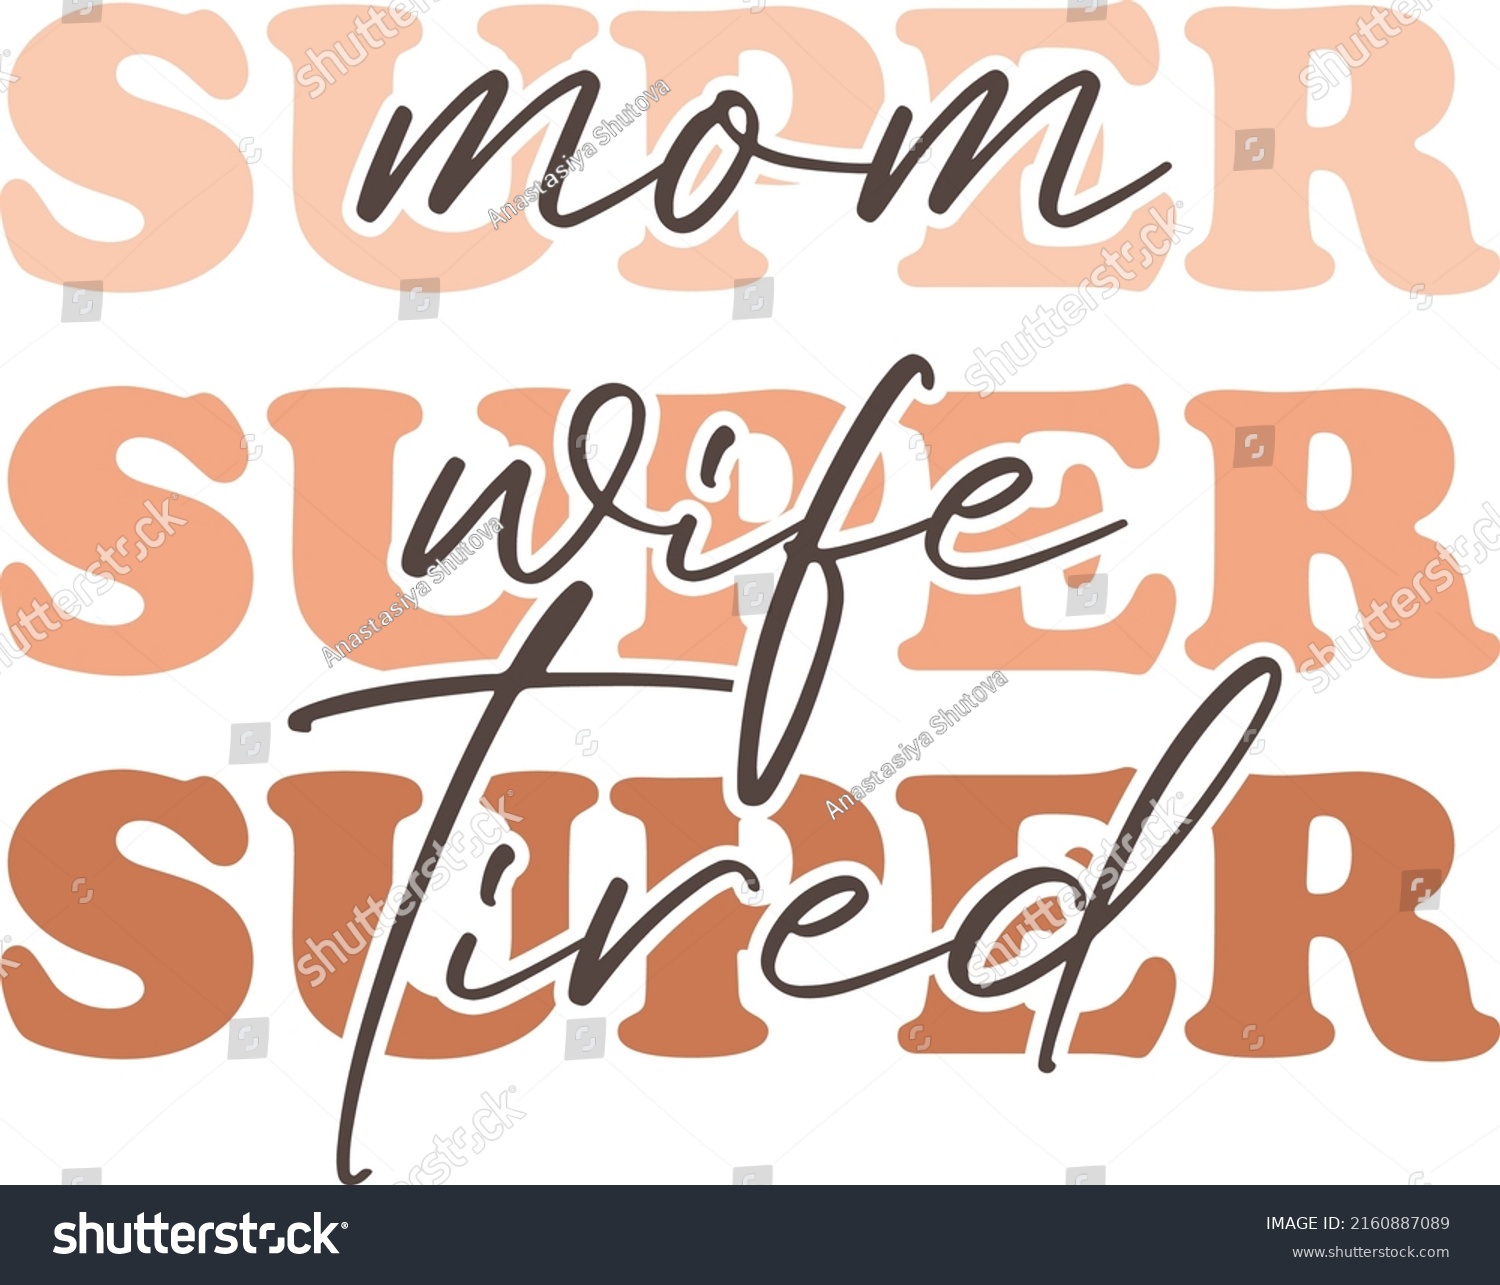 SVG of Super mom Super wife Super tired Svg cut file. Funny mom quote vector illustration isolated on white background. Funny mom t-shirt design svg